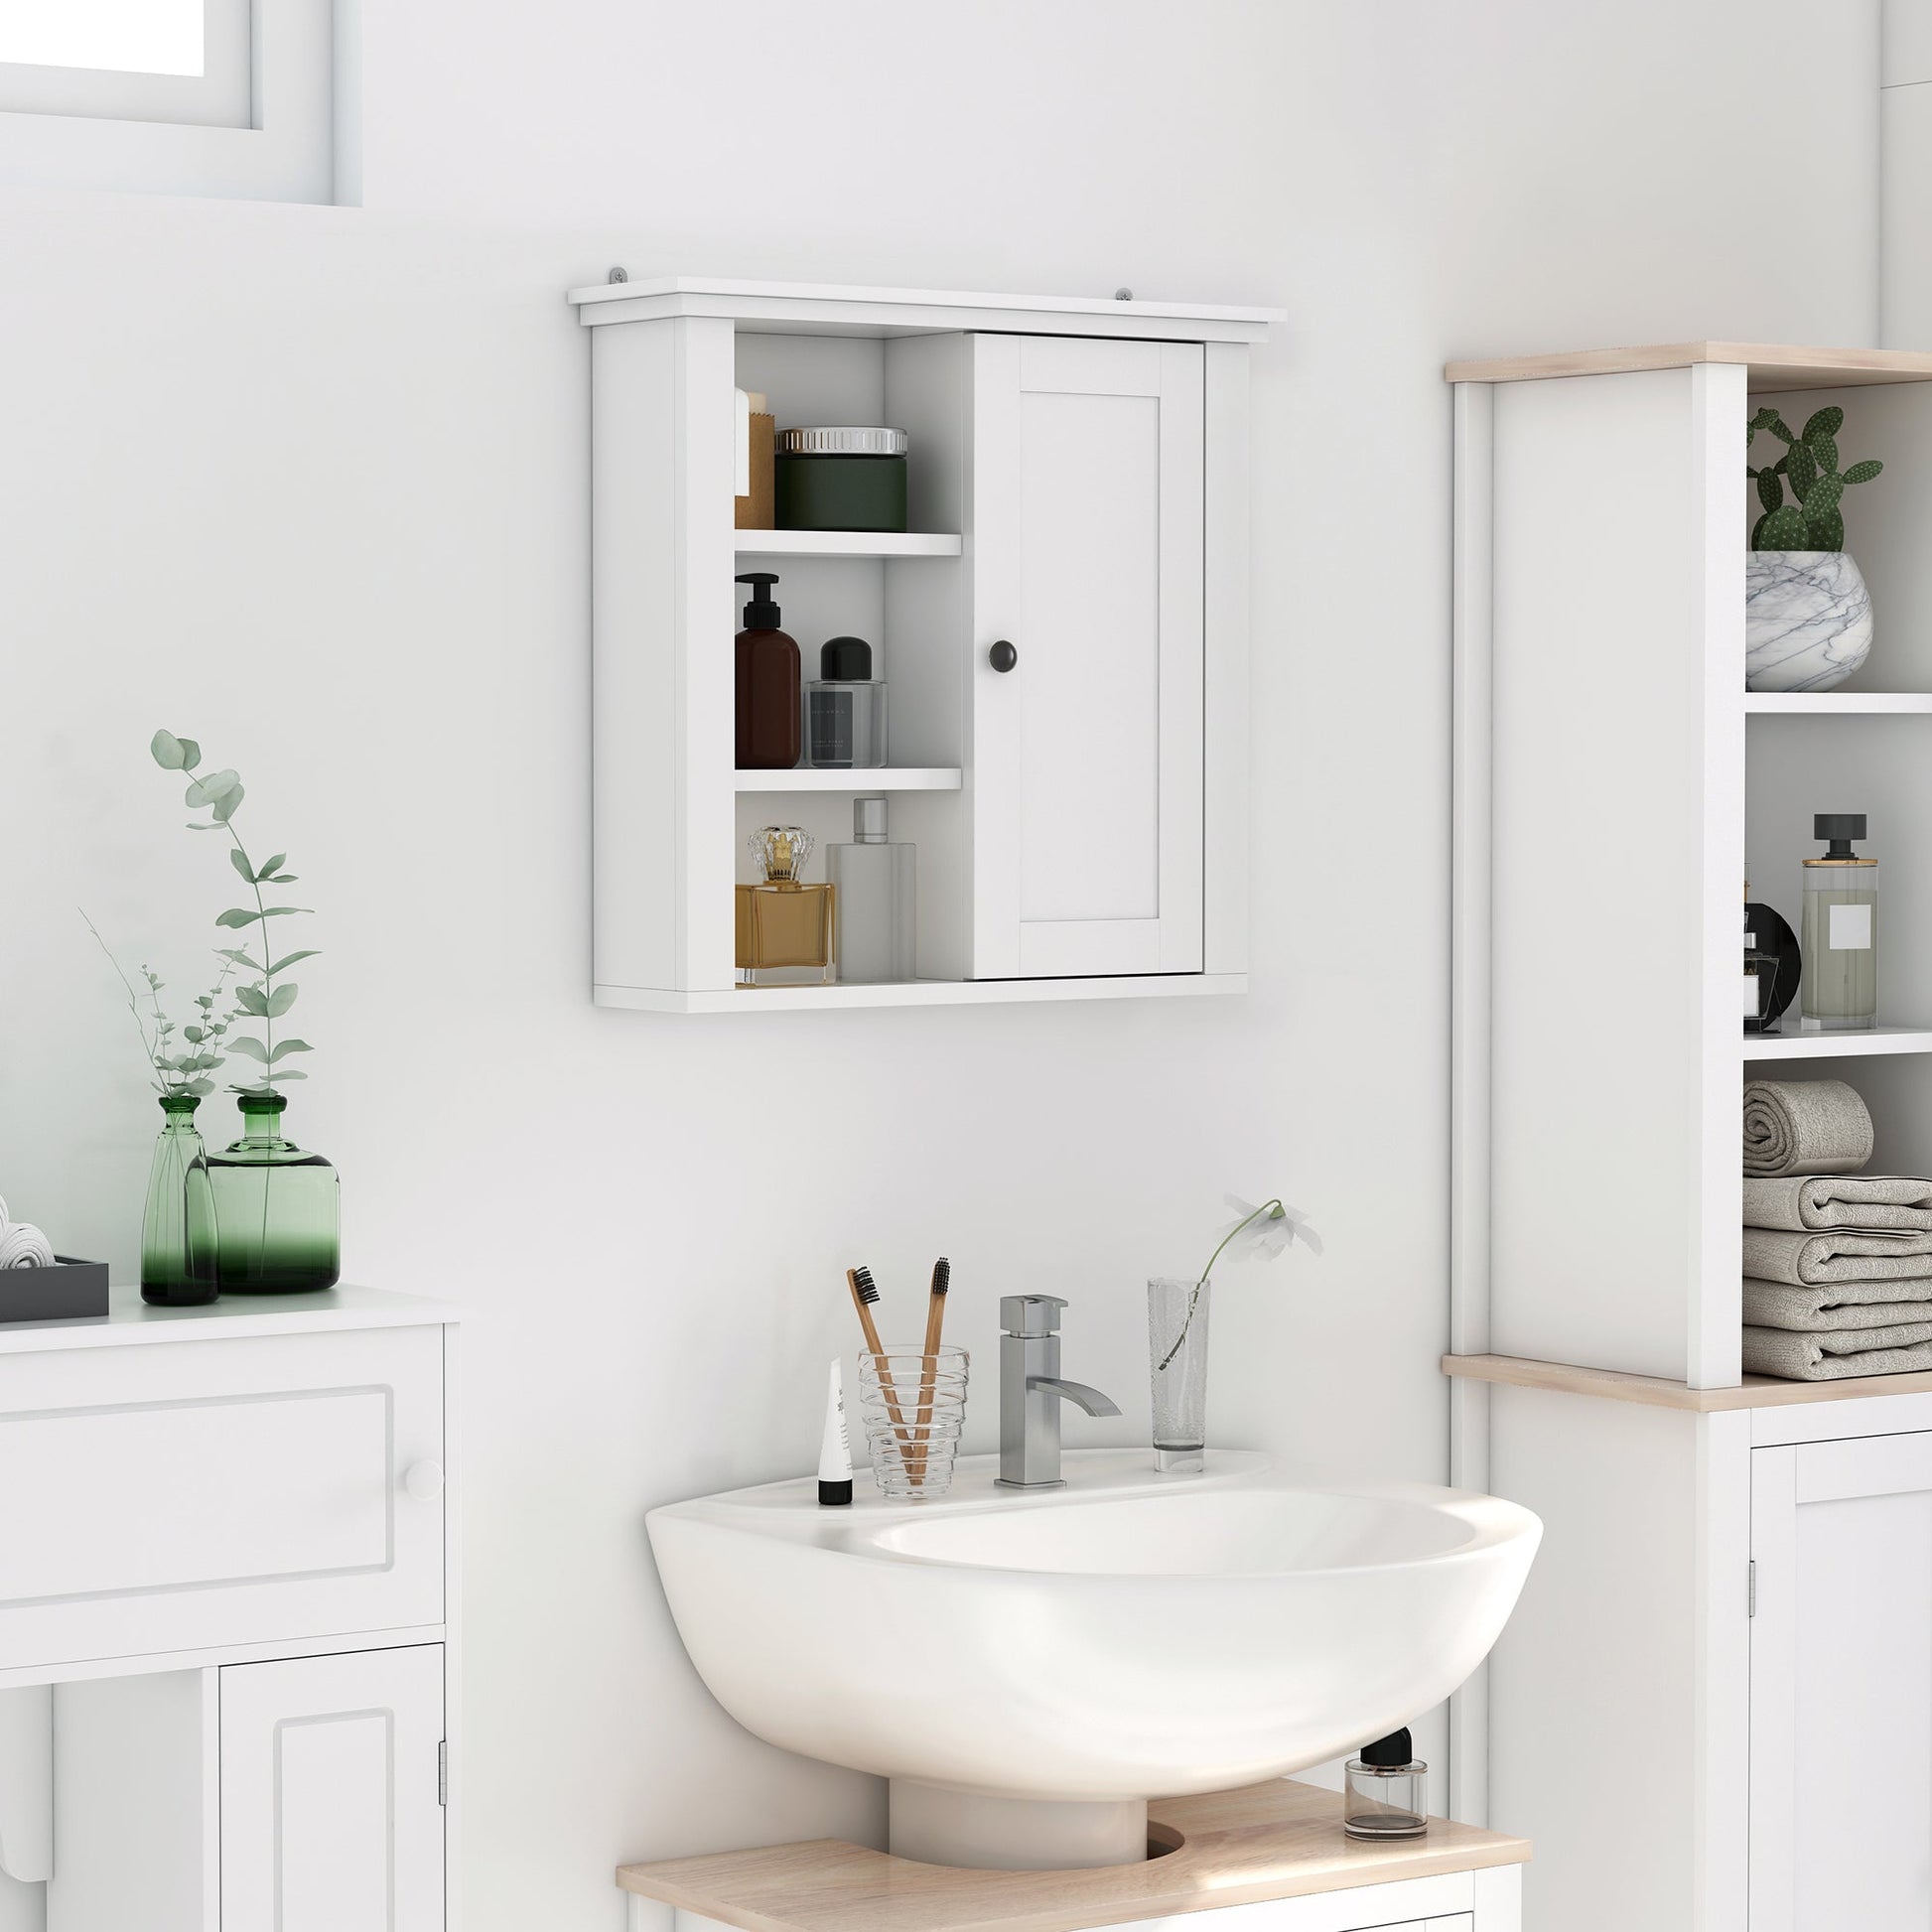 Bathroom Wall Cabinet, Wall Mounted Medicine Cabinet with 3 Open Shelves and Storage Cupboard for Laundry Room, White at Gallery Canada